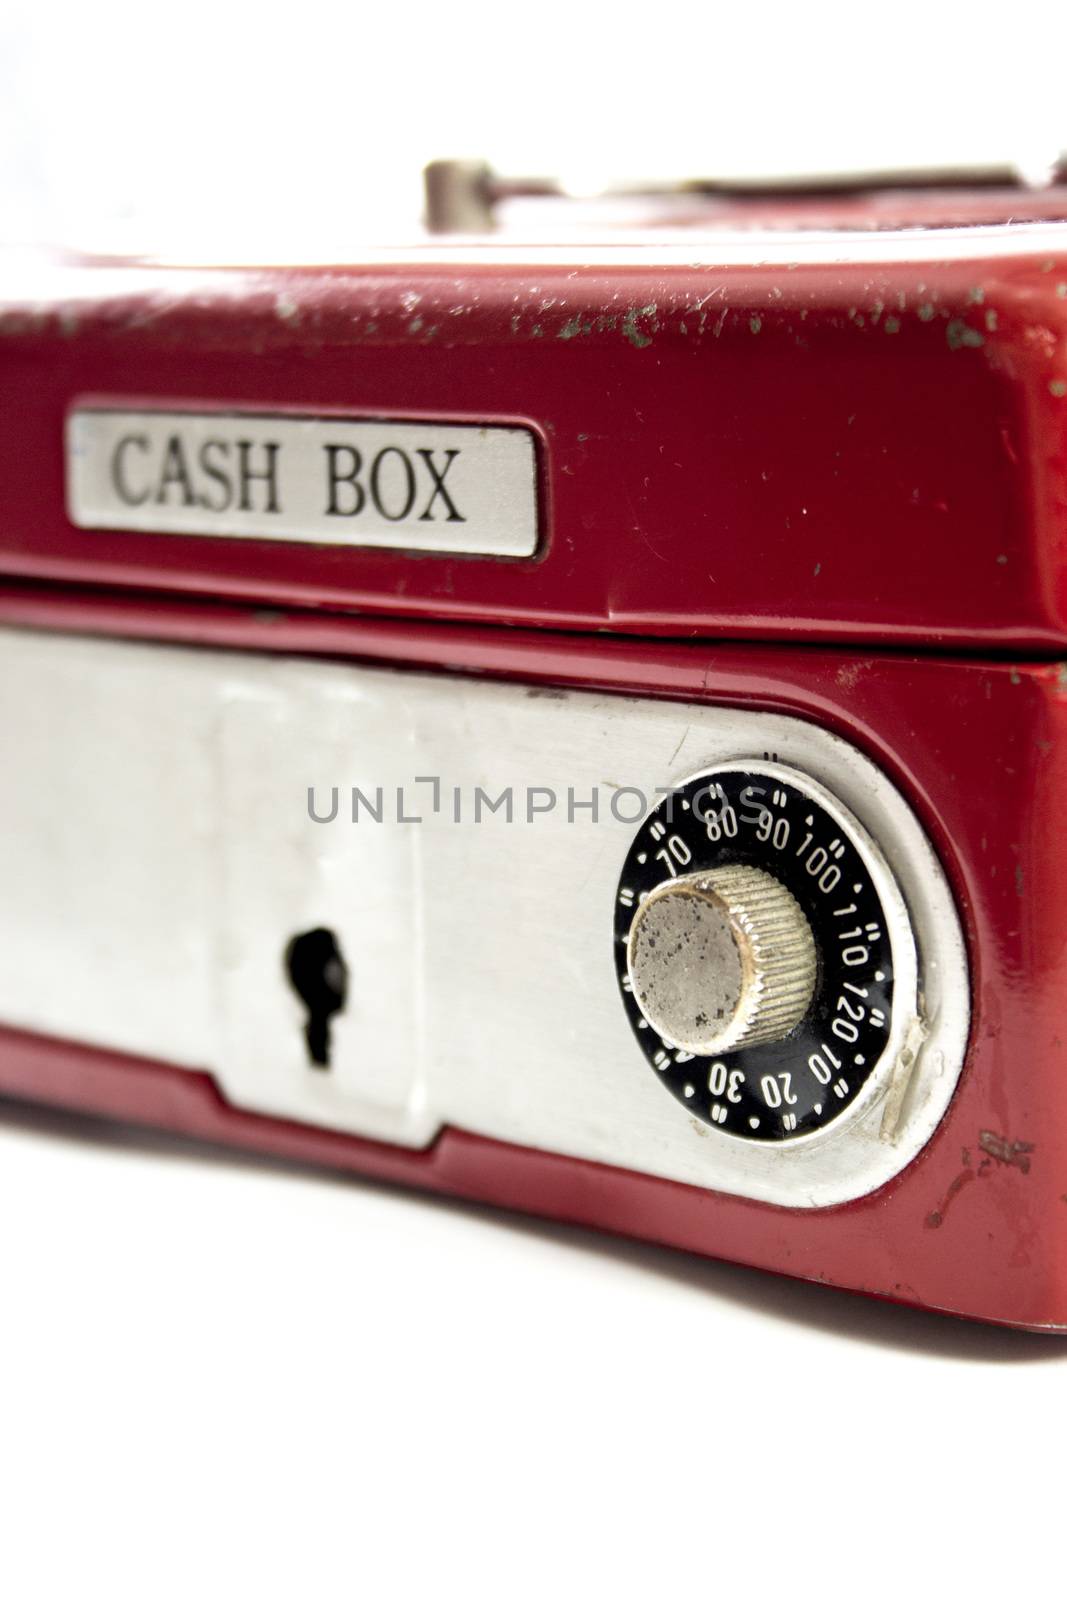 Red cash box on white background.